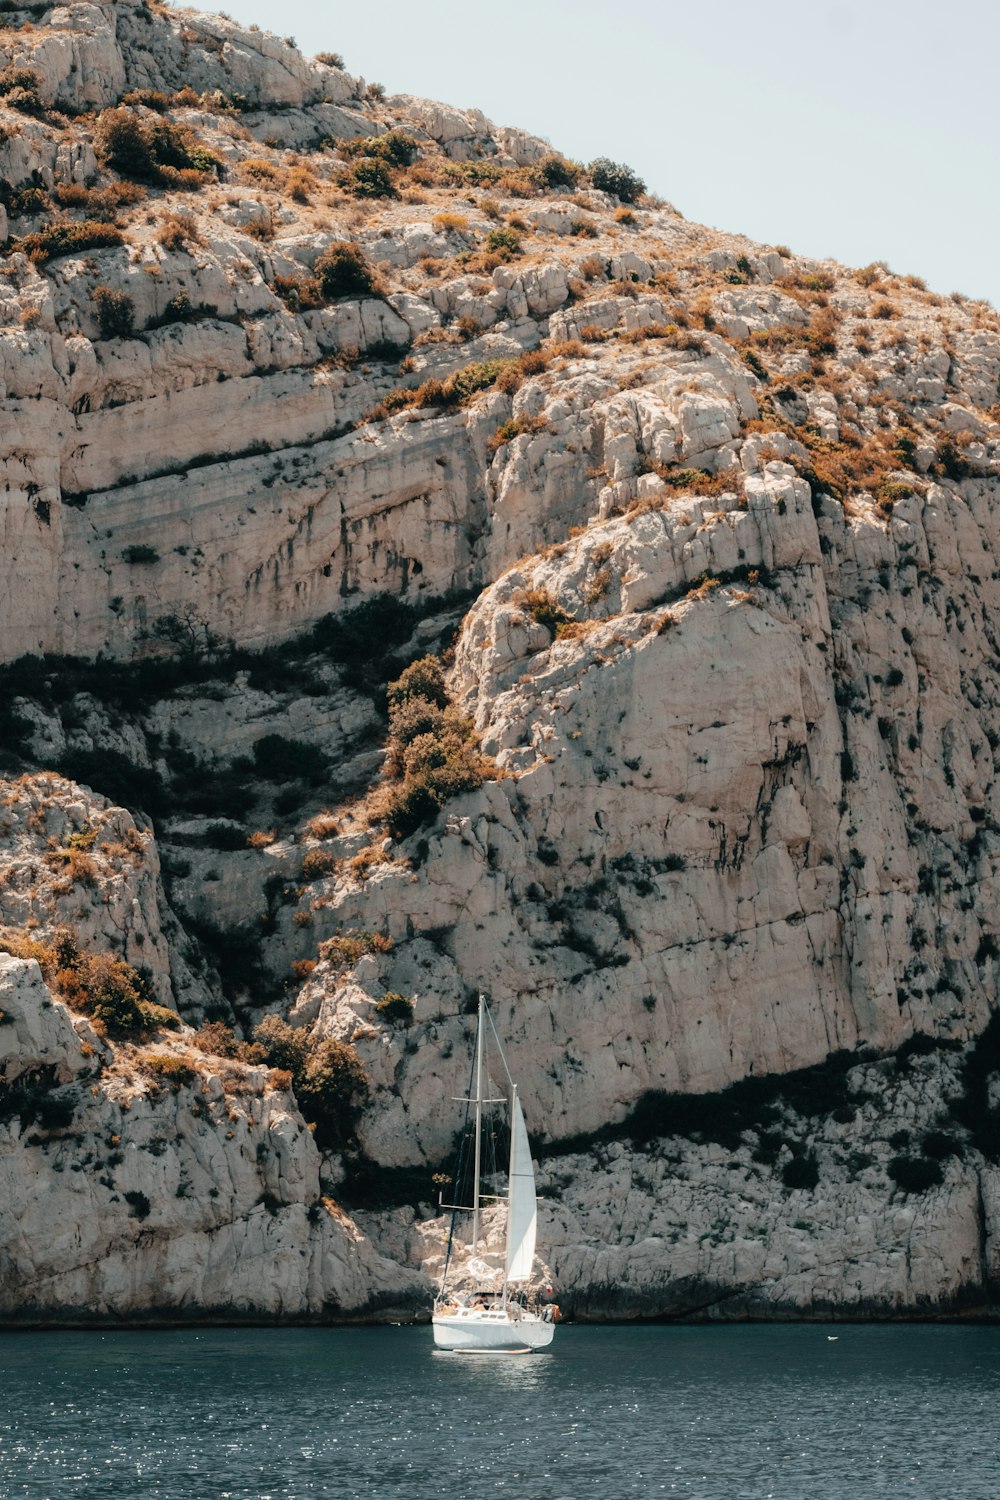 a sailboat in a body of water near a rocky cliff